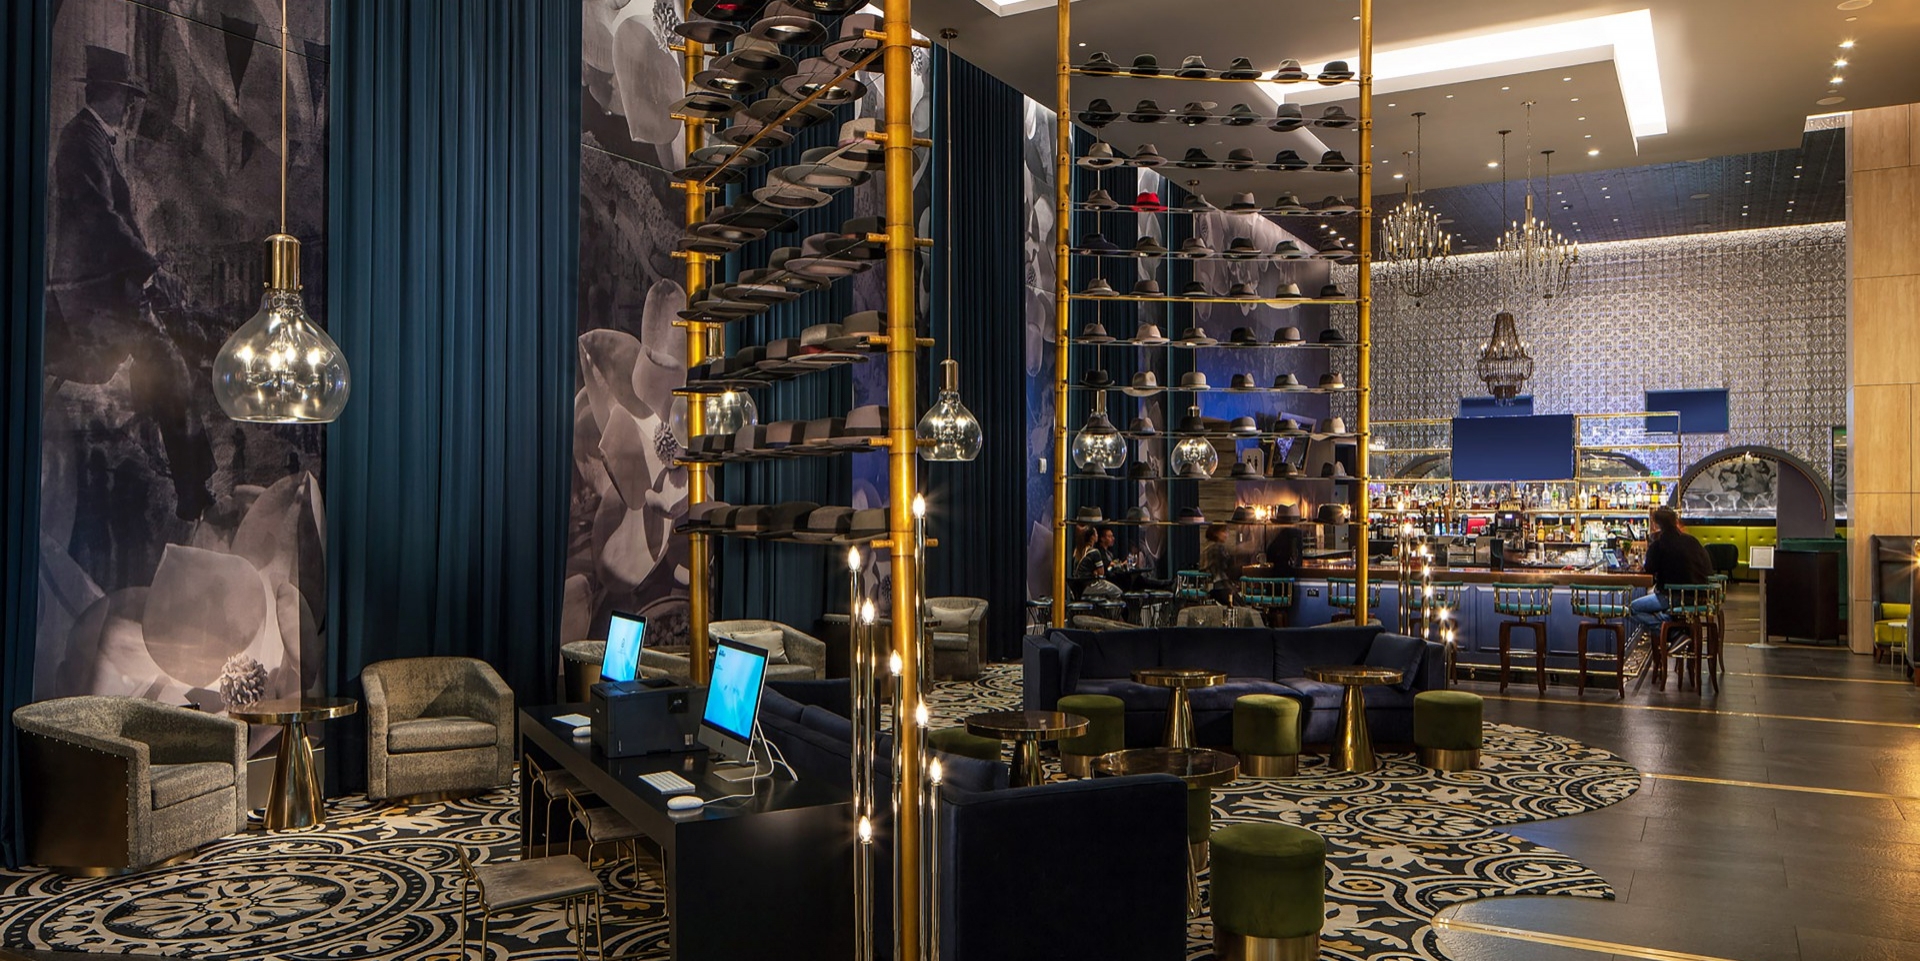 Hirsch Bedner Associates: Elevating Hospitality Design to New Heights